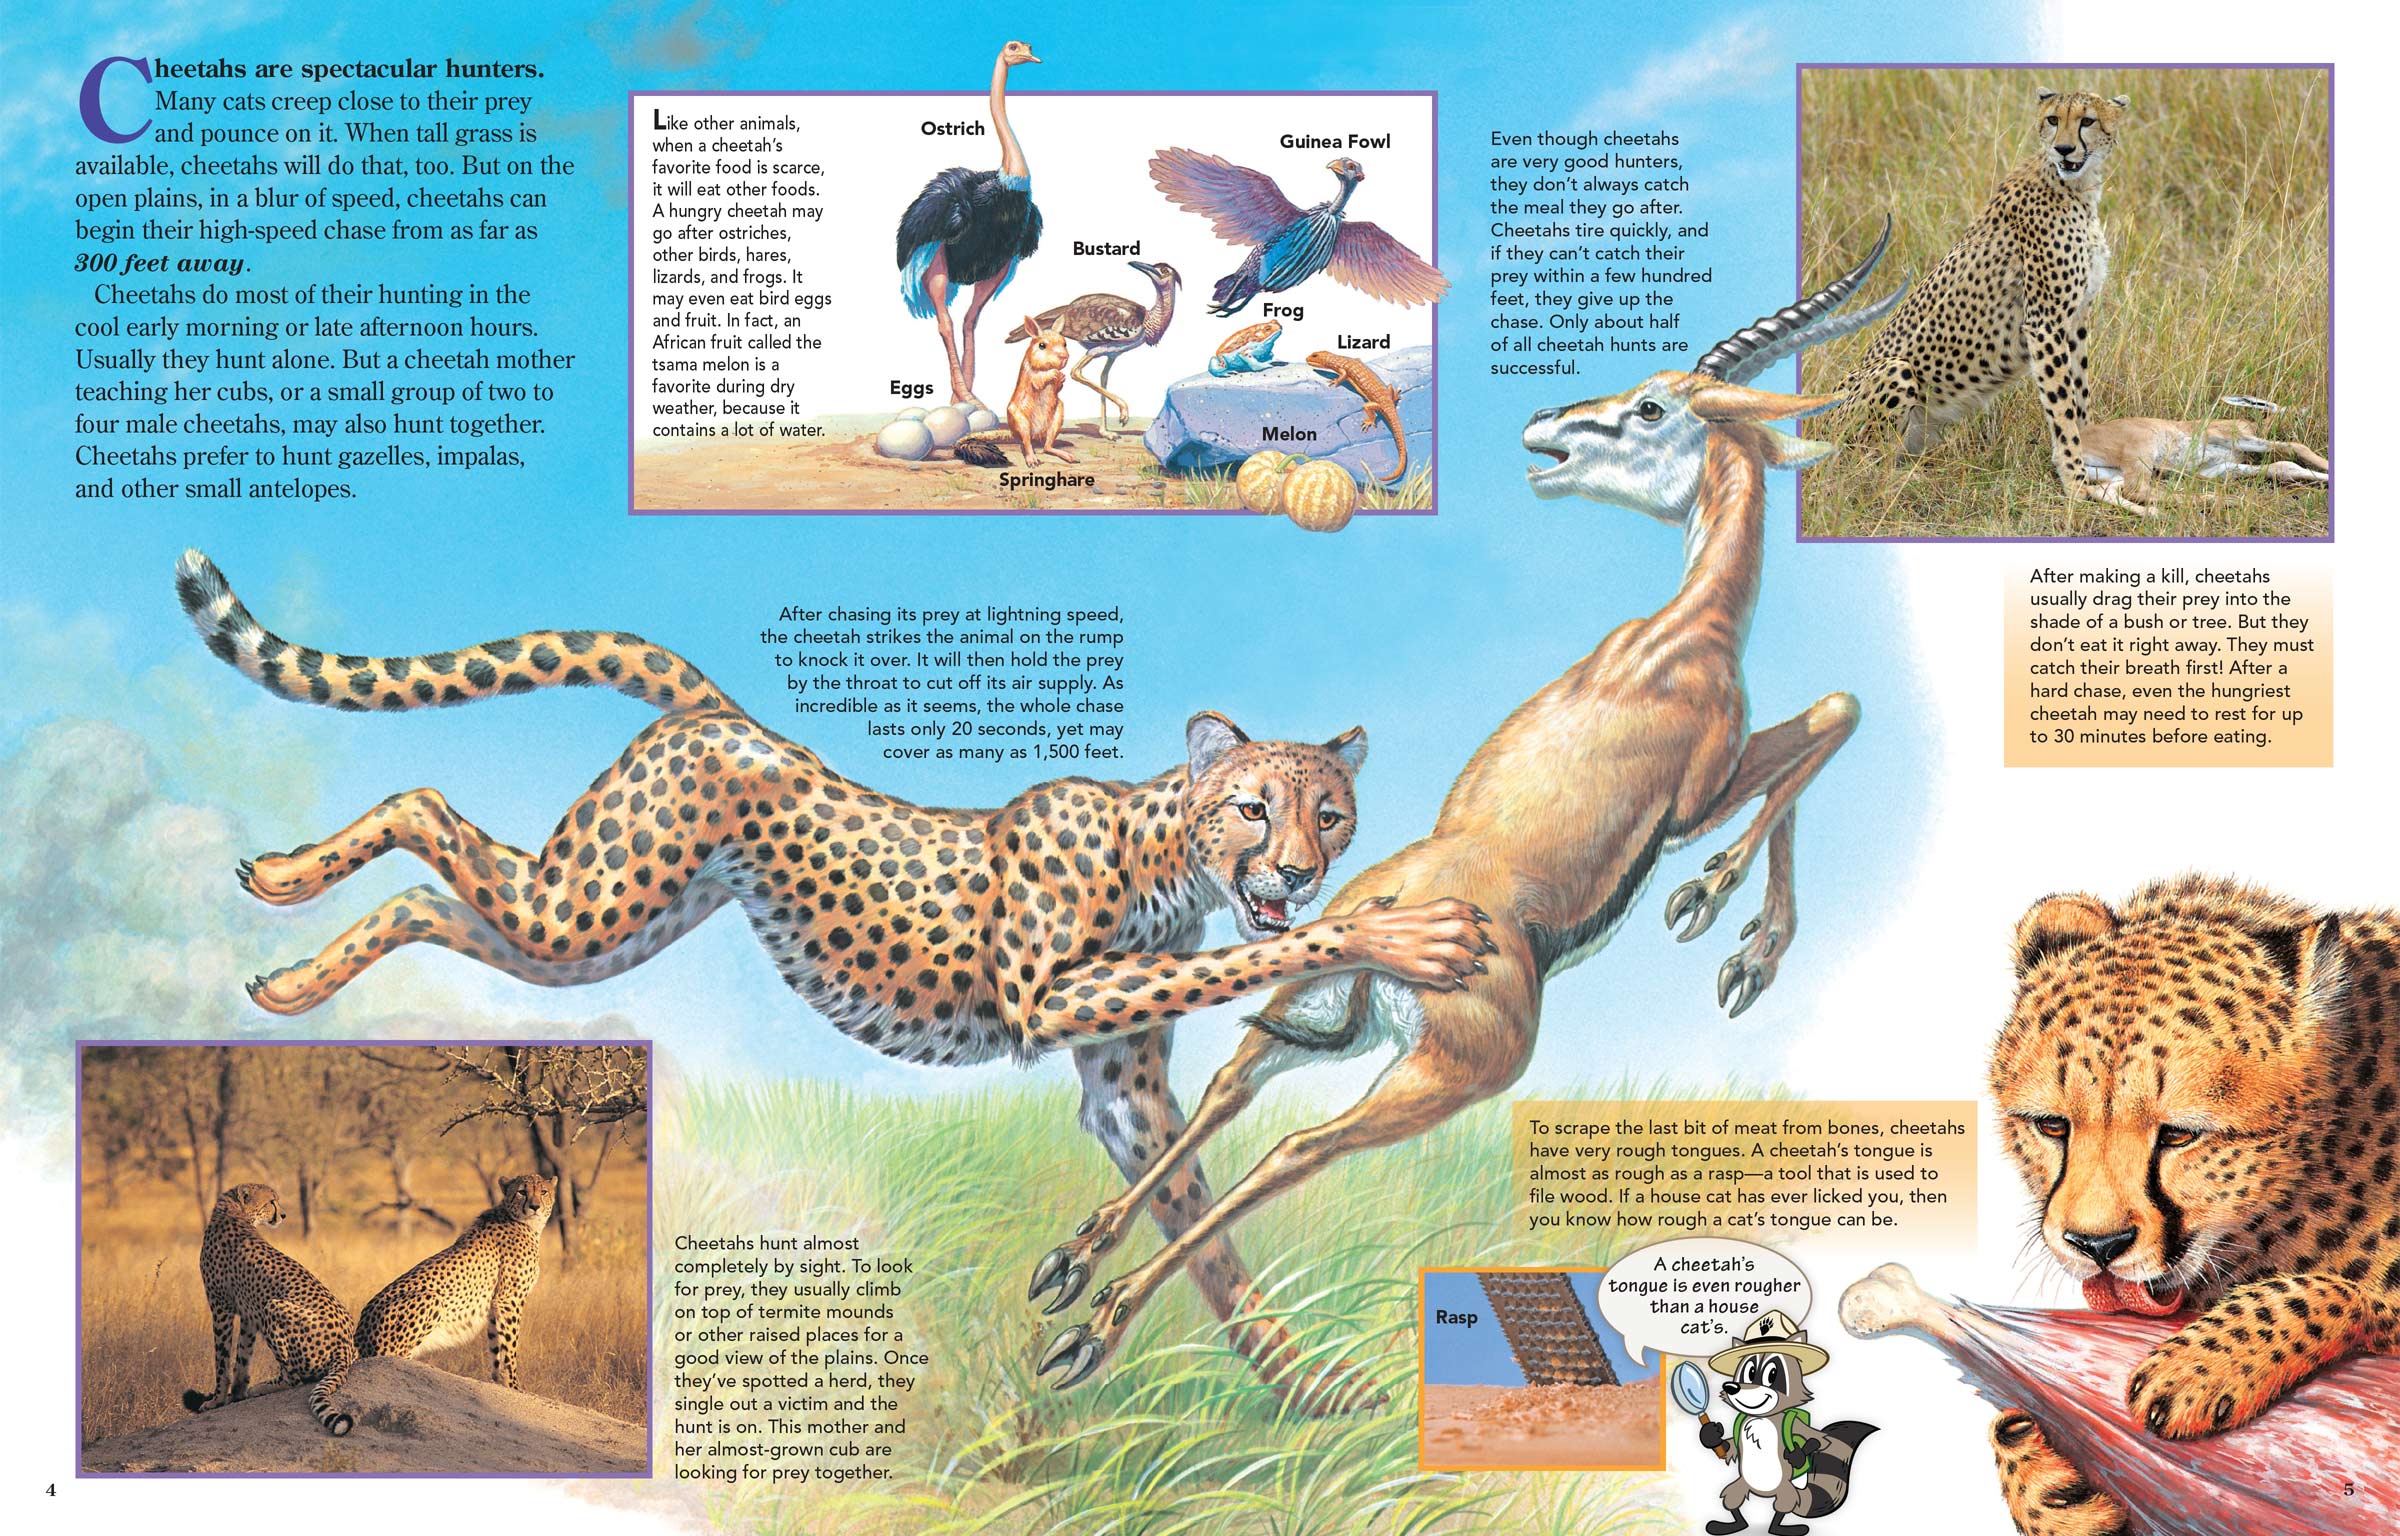 Pages 4&5 of Zoobooks Cheetahs, showing a cheetah taking down a gazelle.